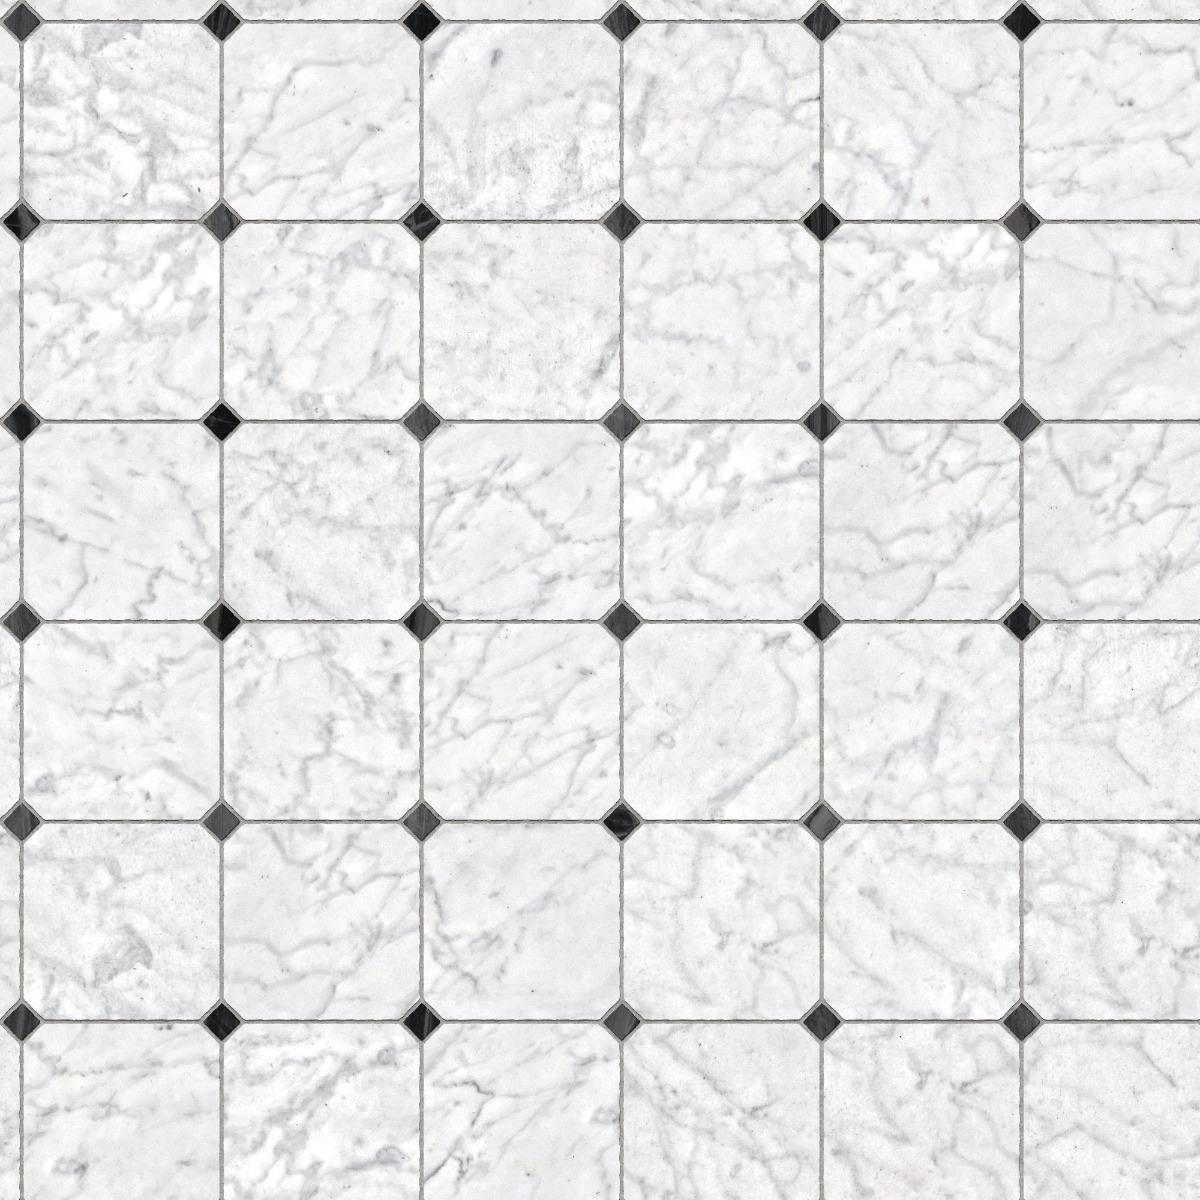 A seamless stone texture with white marble blocks arranged in a Octagon Square pattern